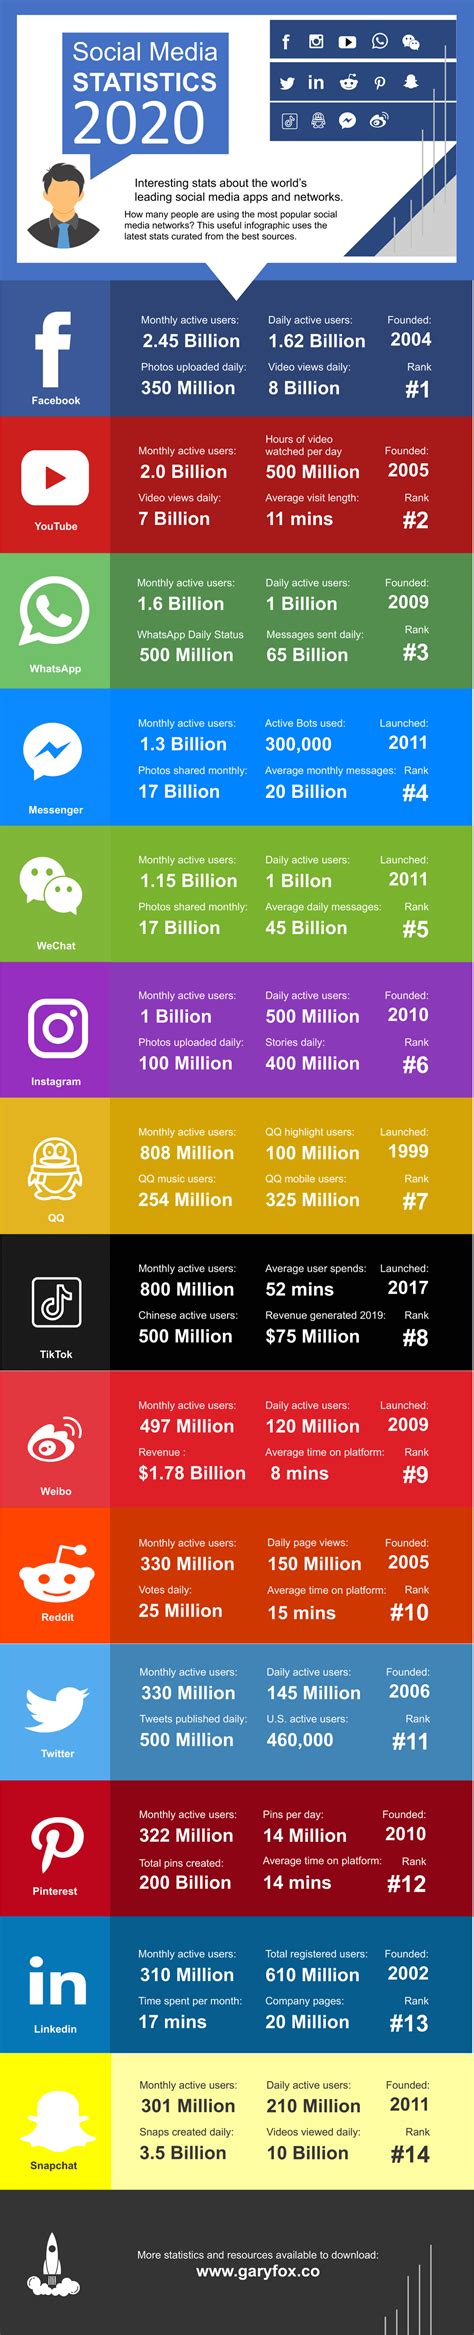 120 Insane Social Media Statistics In 2020 Every Marketer Needs To Know Social Media